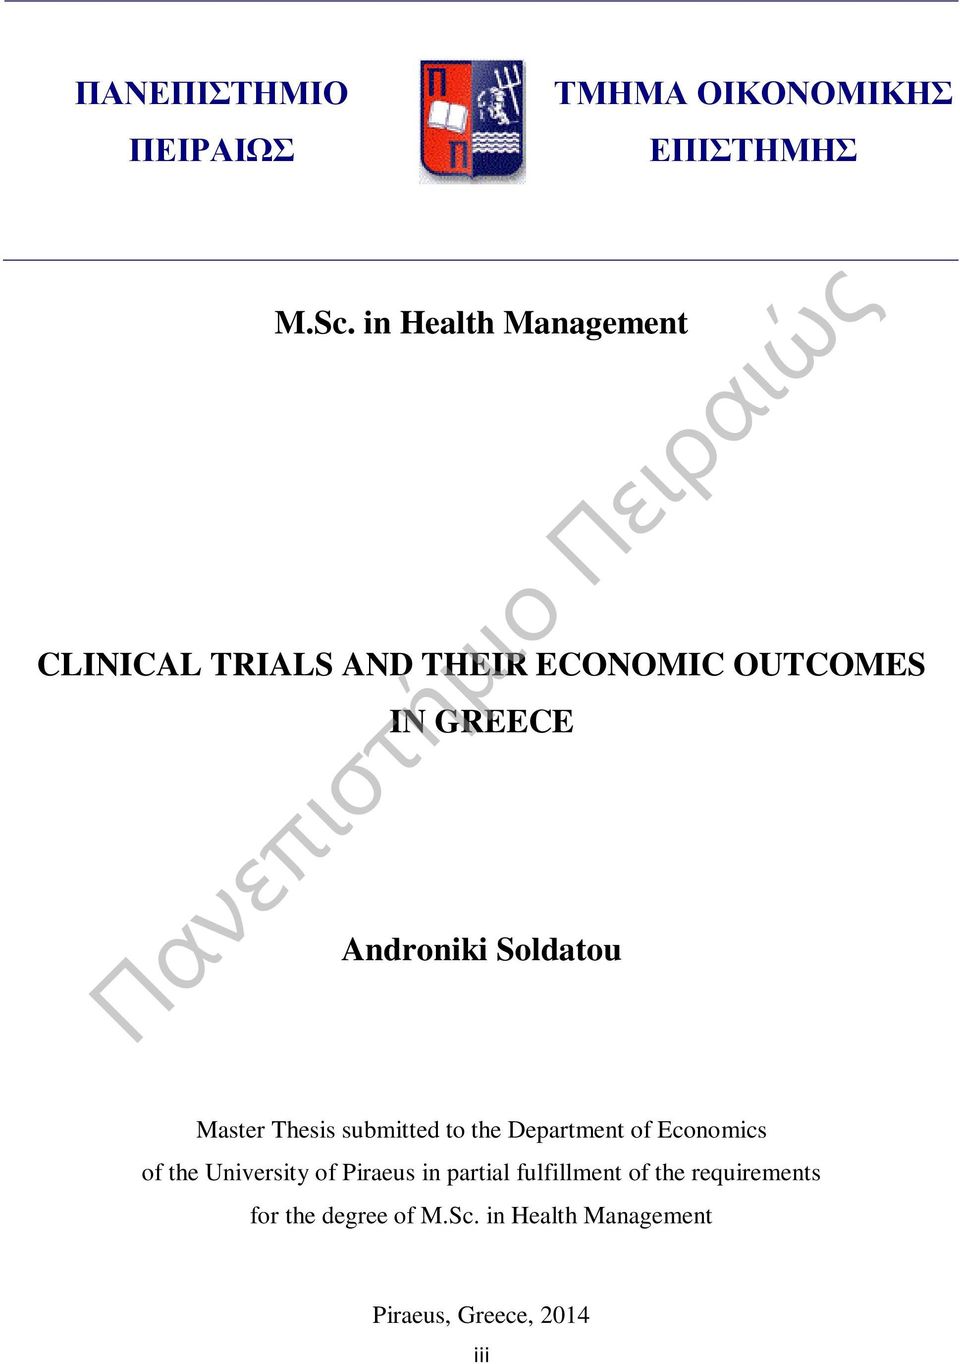 Soldatou Master Thesis submitted to the Department of Economics of the University of